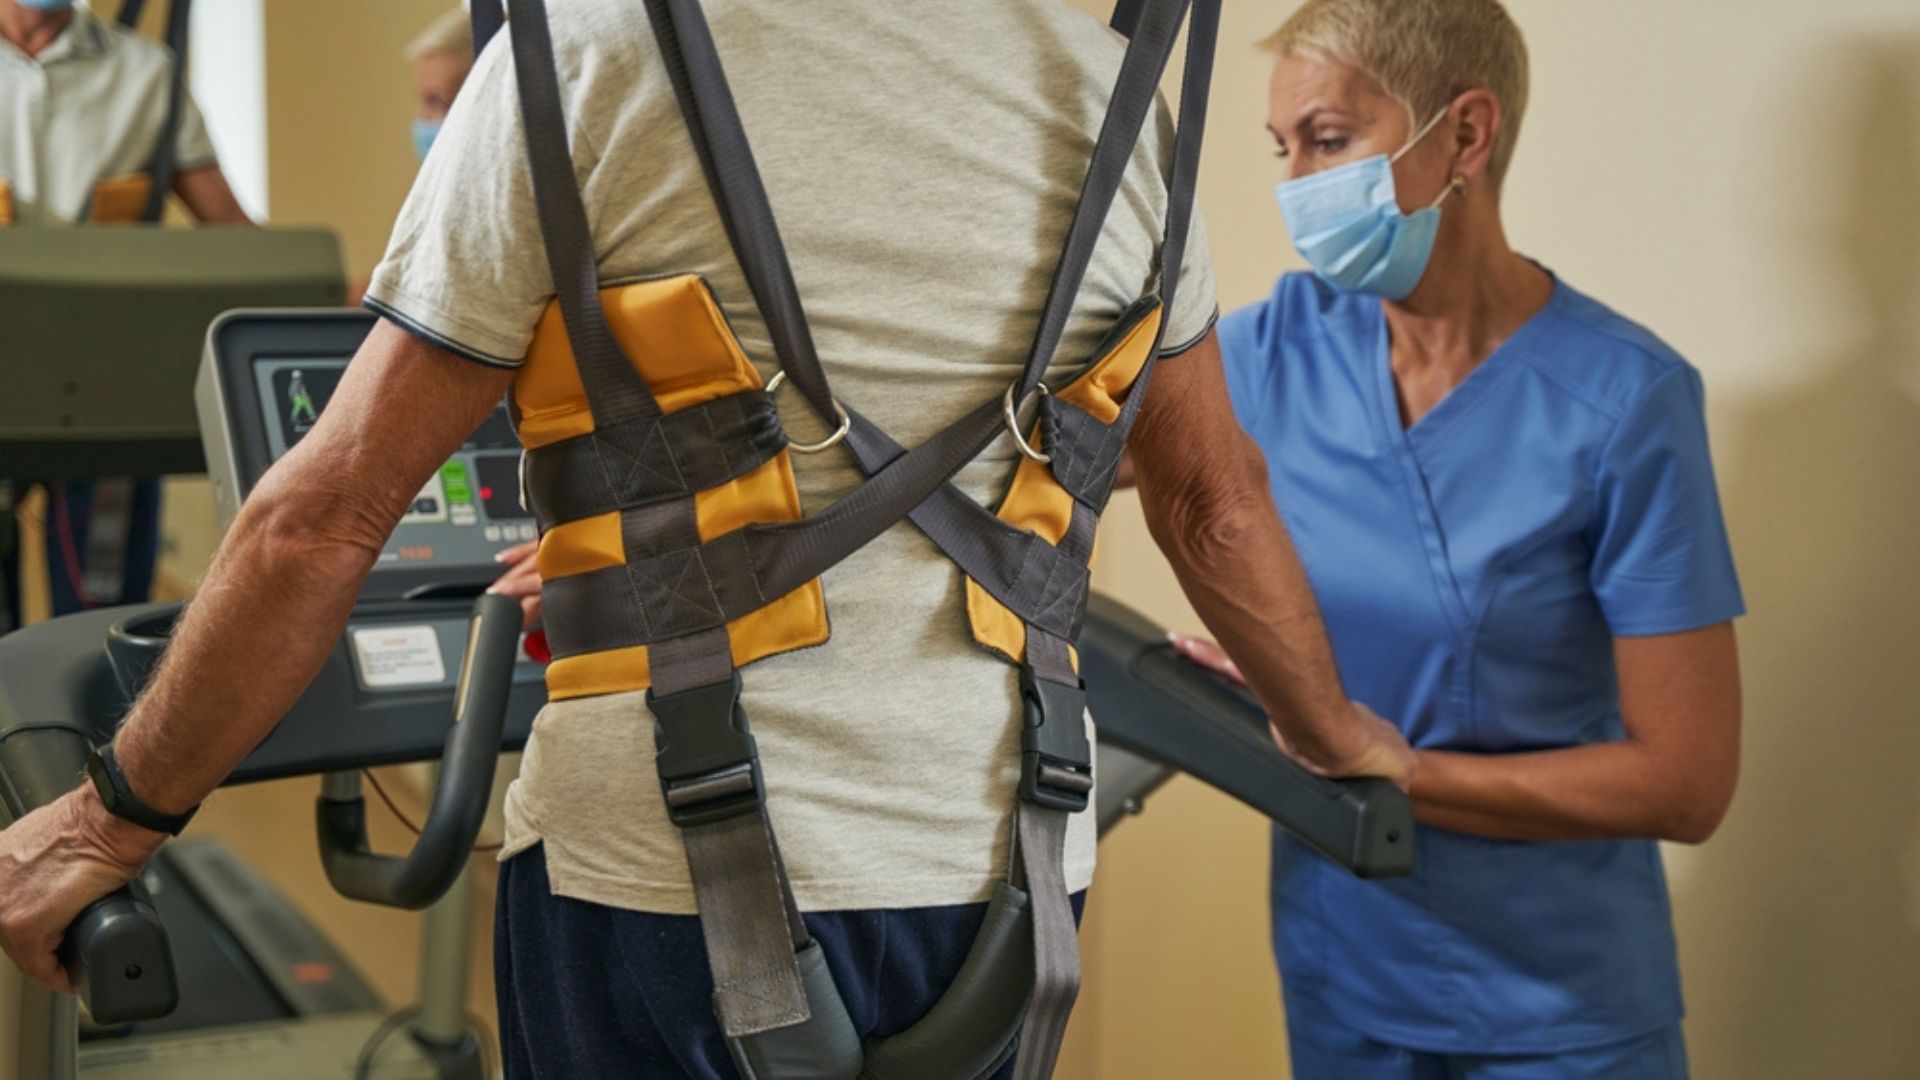 Man walking on treadmill wearing body weight support harness during physiotherapy session. Treadmill training to improve walking after stroke. Stroke rehabilitation at Propel Physiotherapy.